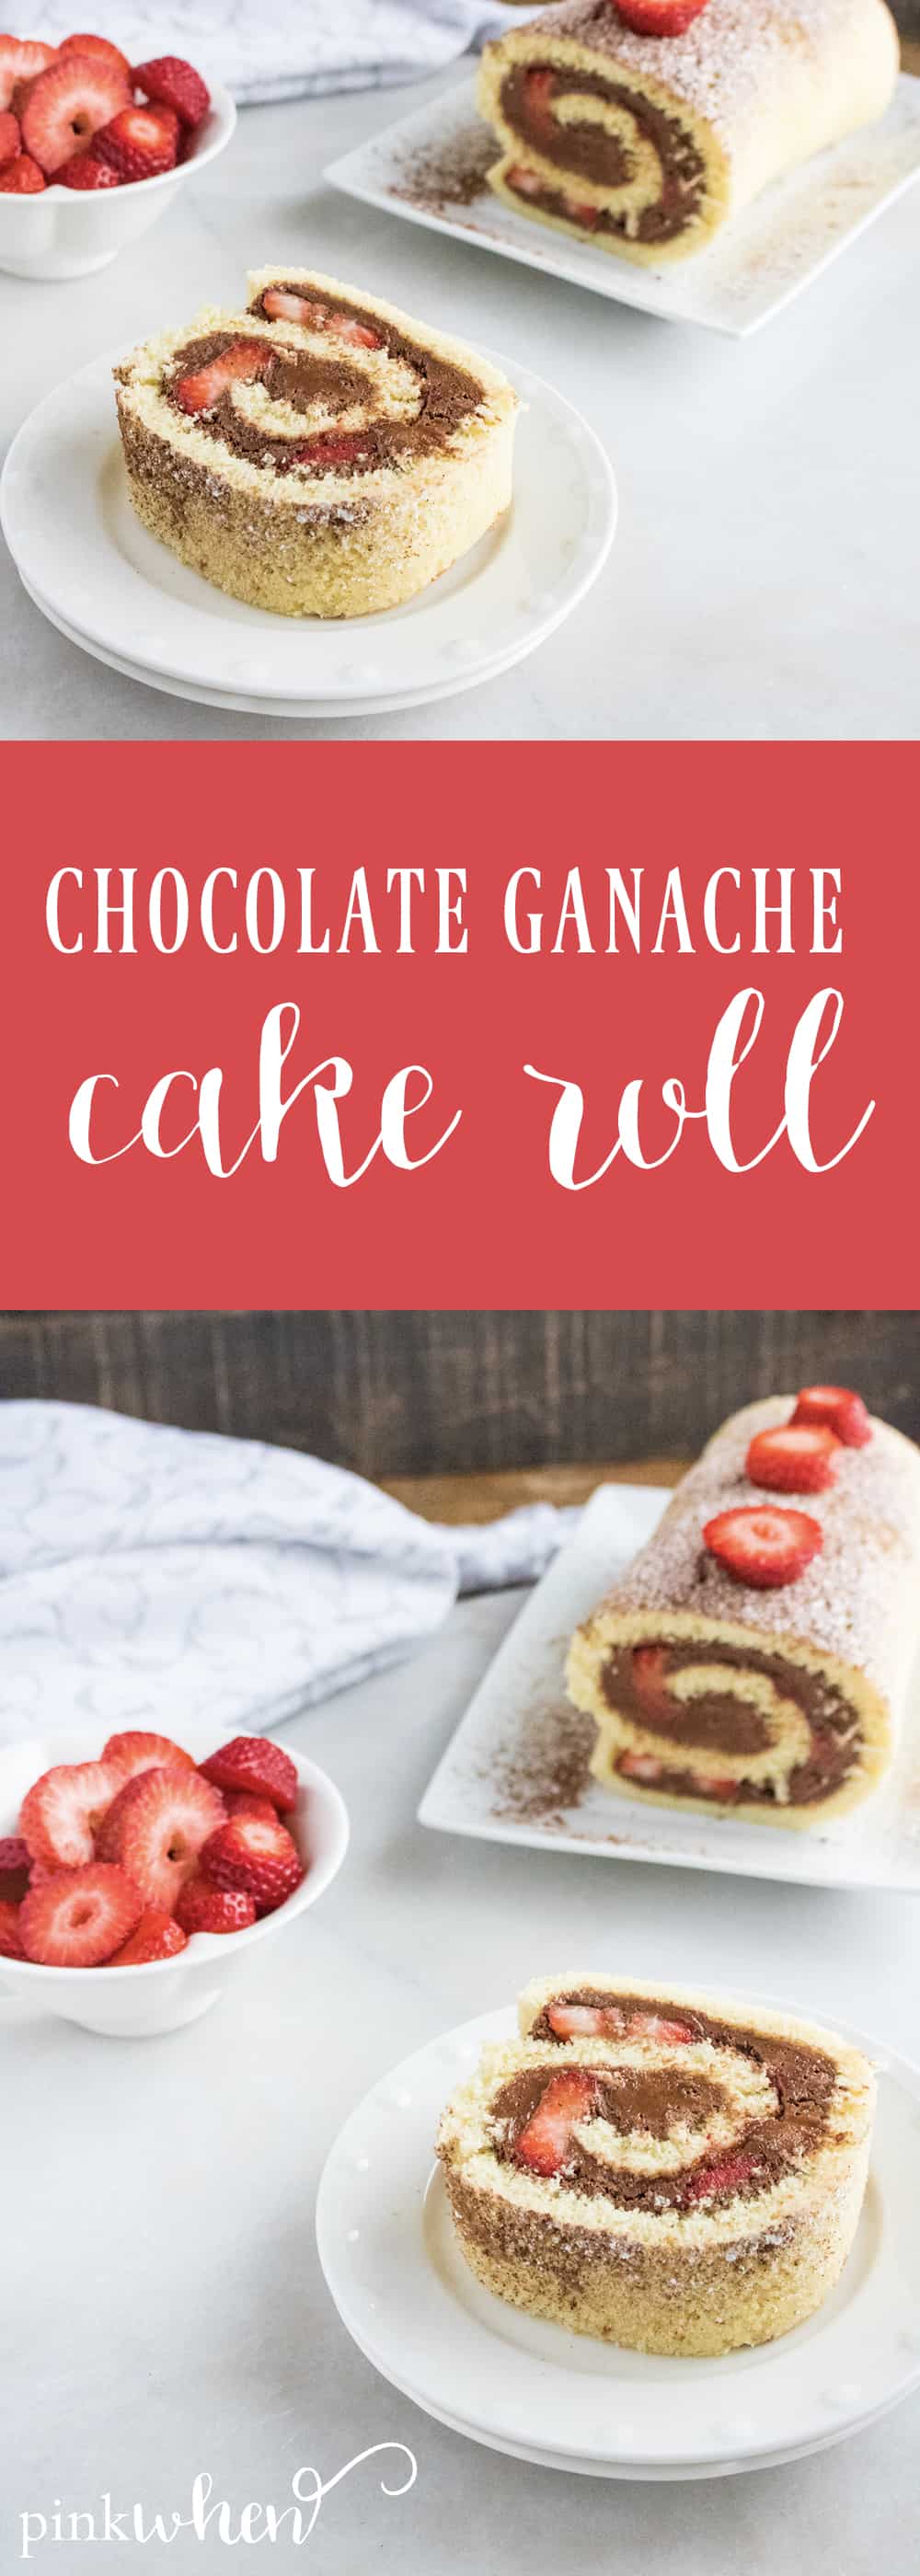 This is one of our new favorite dessert recipes - full of delicious chocolate strawberry flavor! This chocolate ganache cake roll recipe is so sweet, spongey, moist, and delicious! This chocolate roll cake will easily become a favorite in your household!